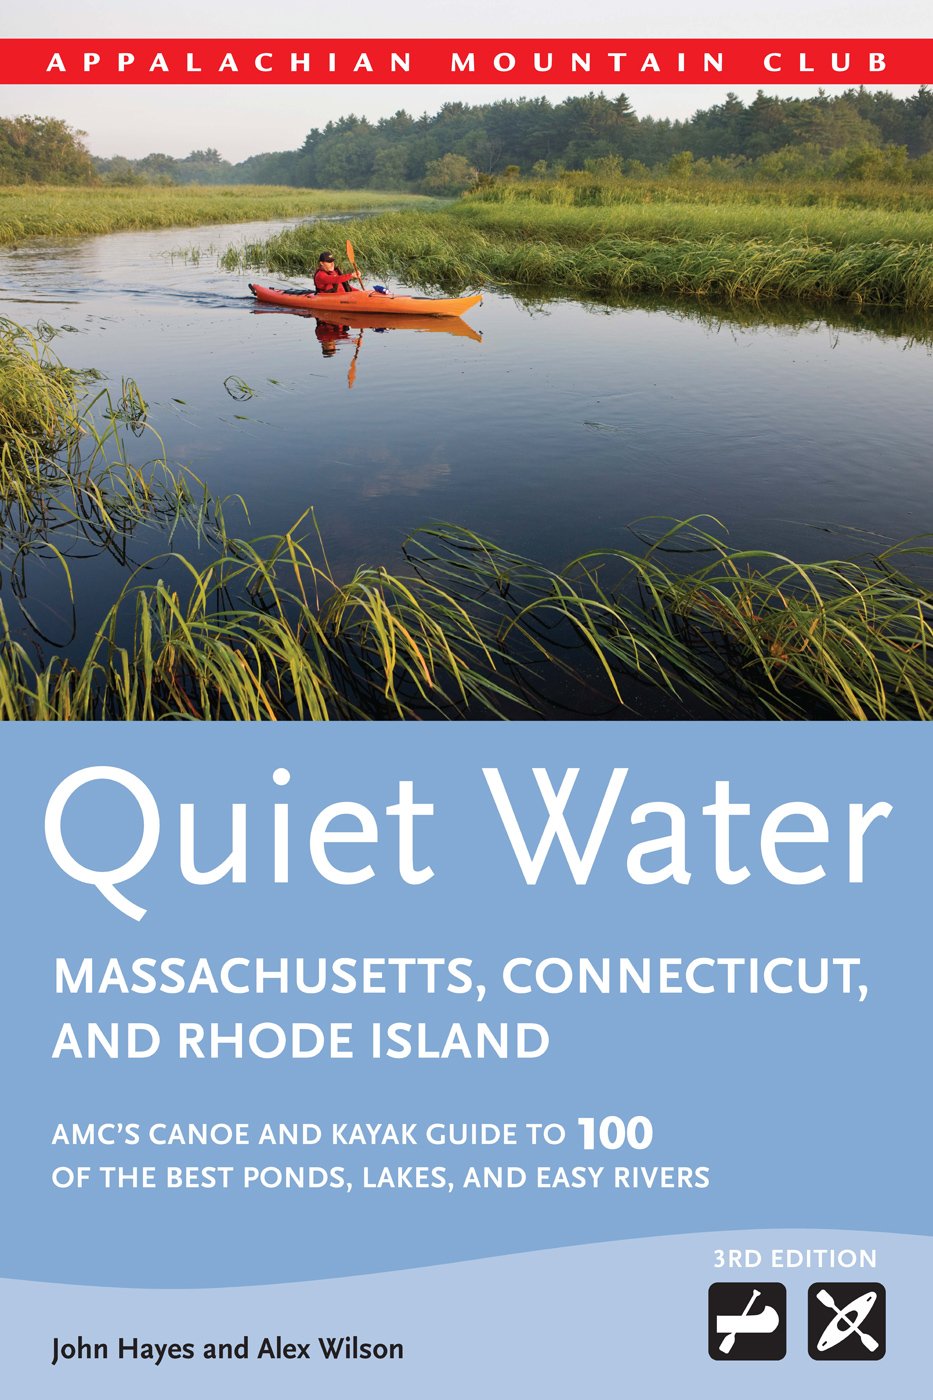 Quiet Water Massachusetts, Connecticut, and Rhode Island, 3rd Edition